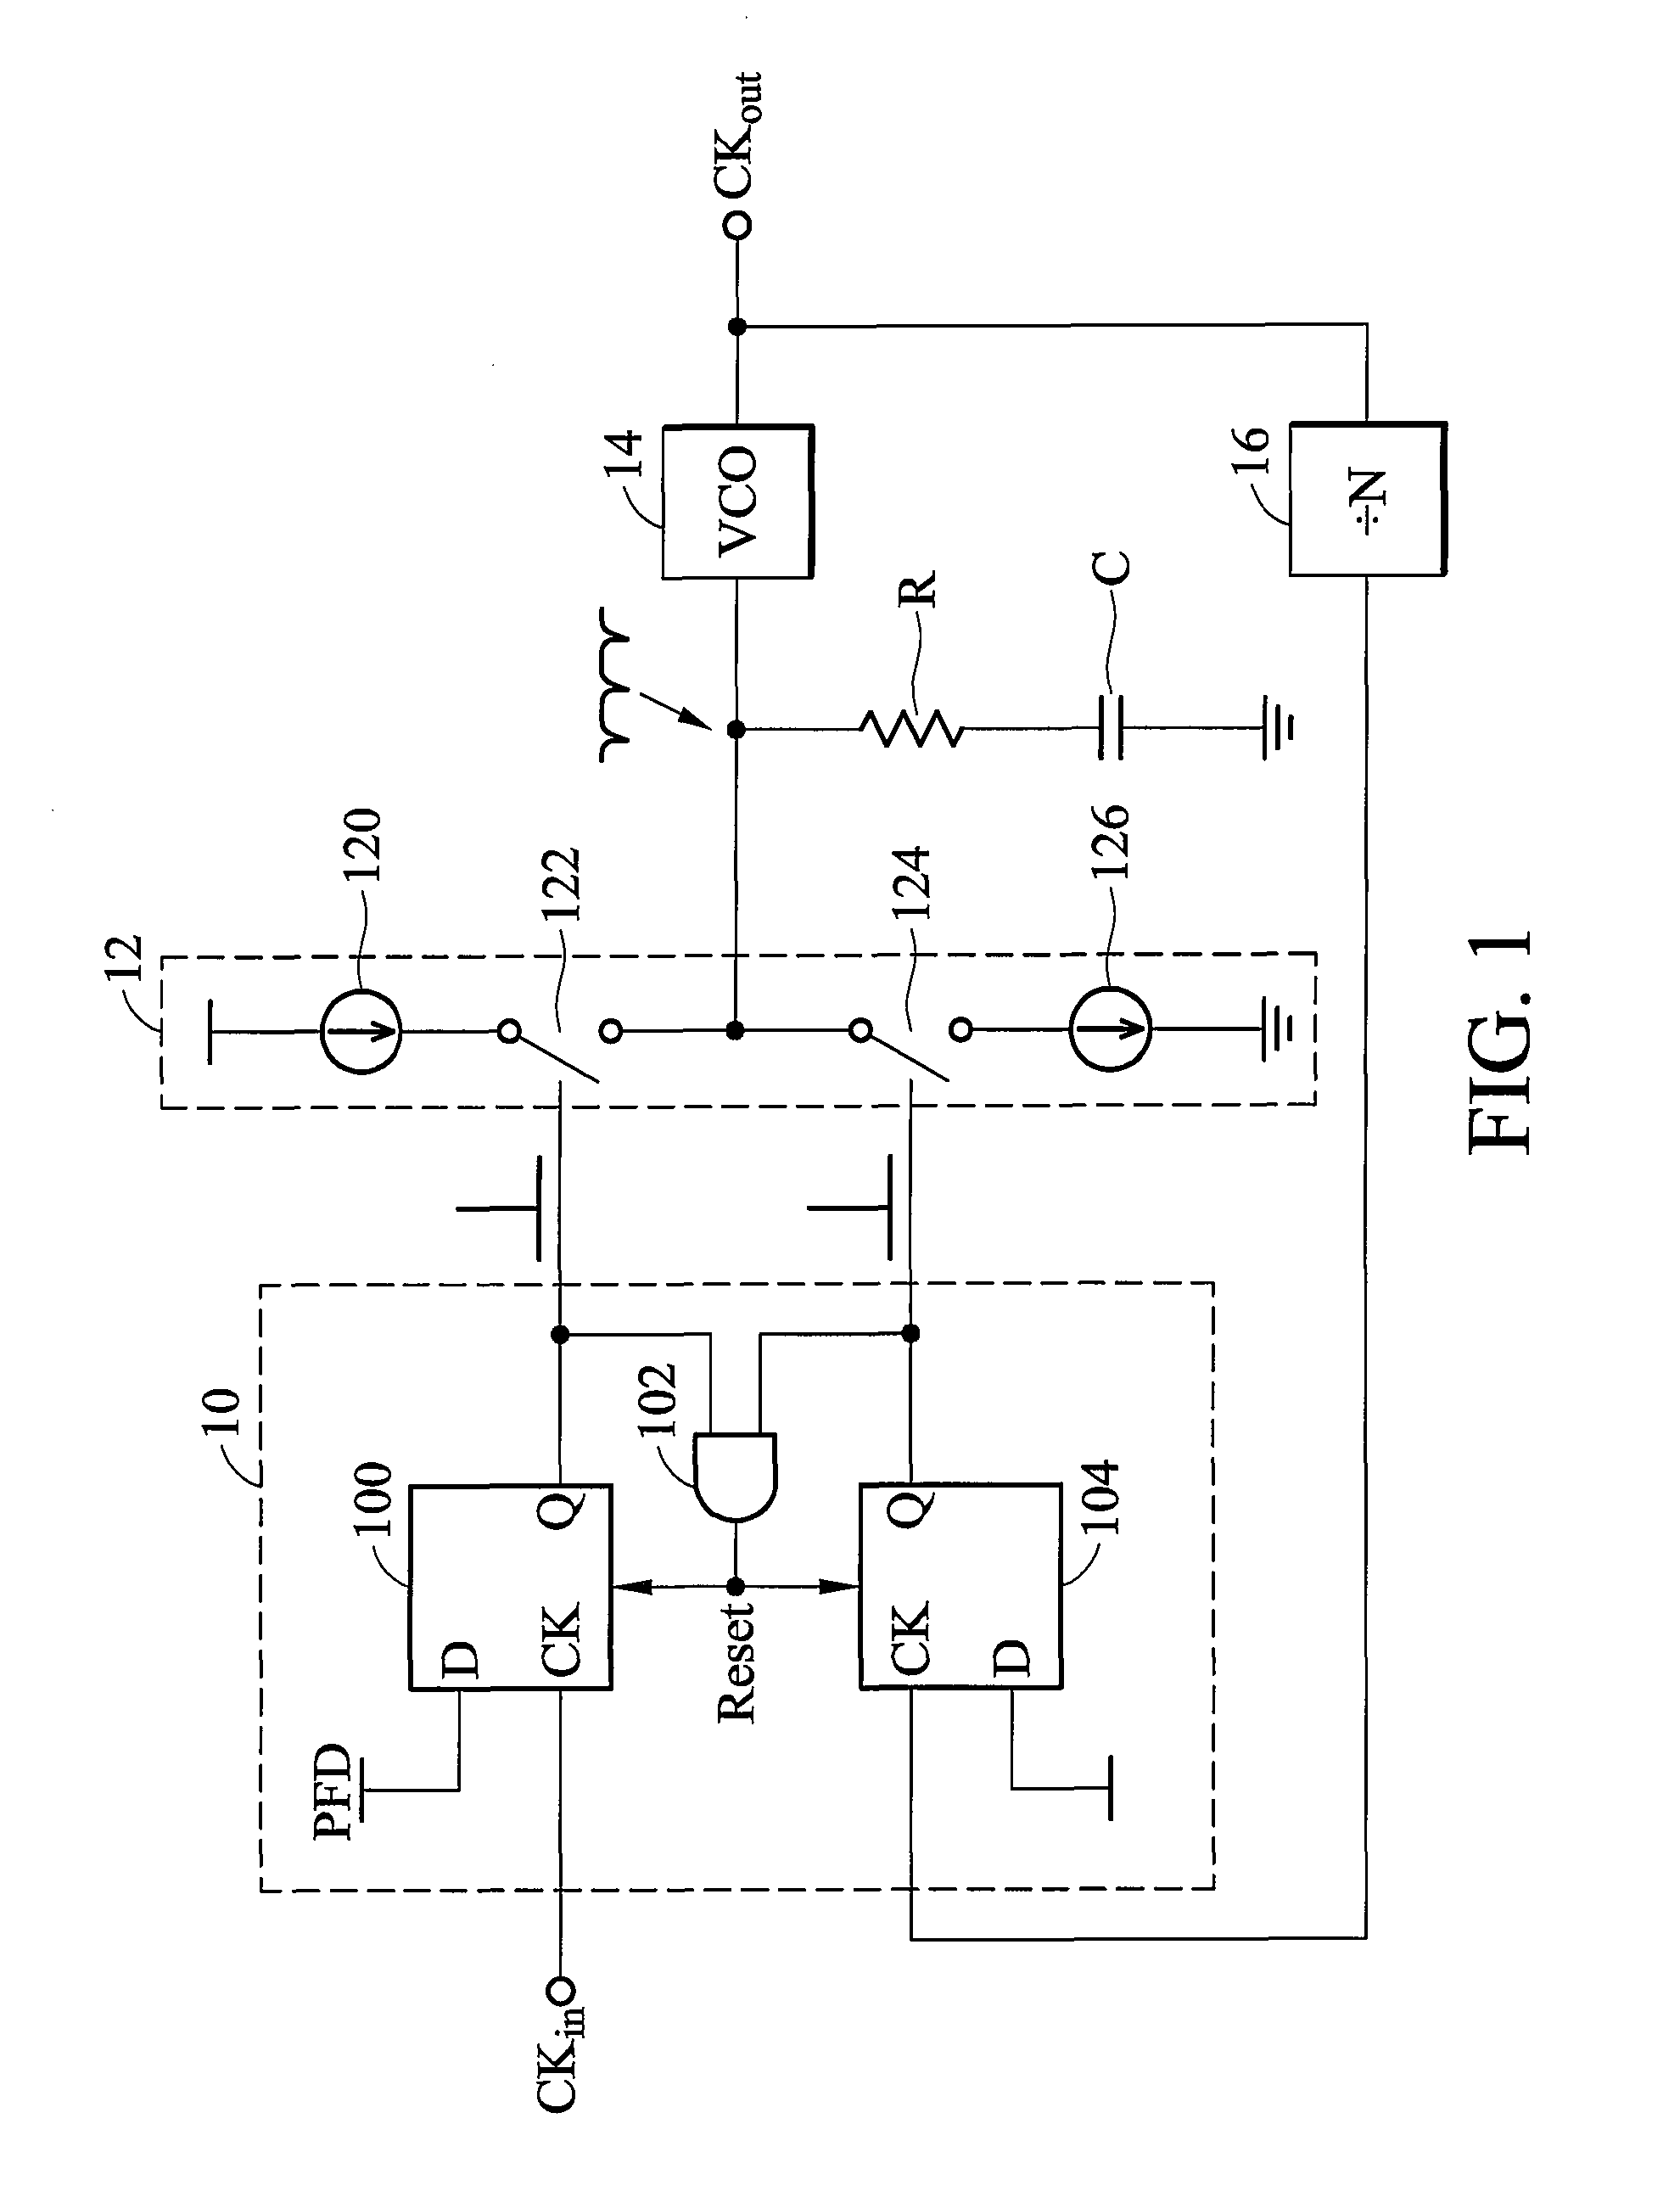 Phase locked loop, voltage controlled oscillator, and phase-frequency detector